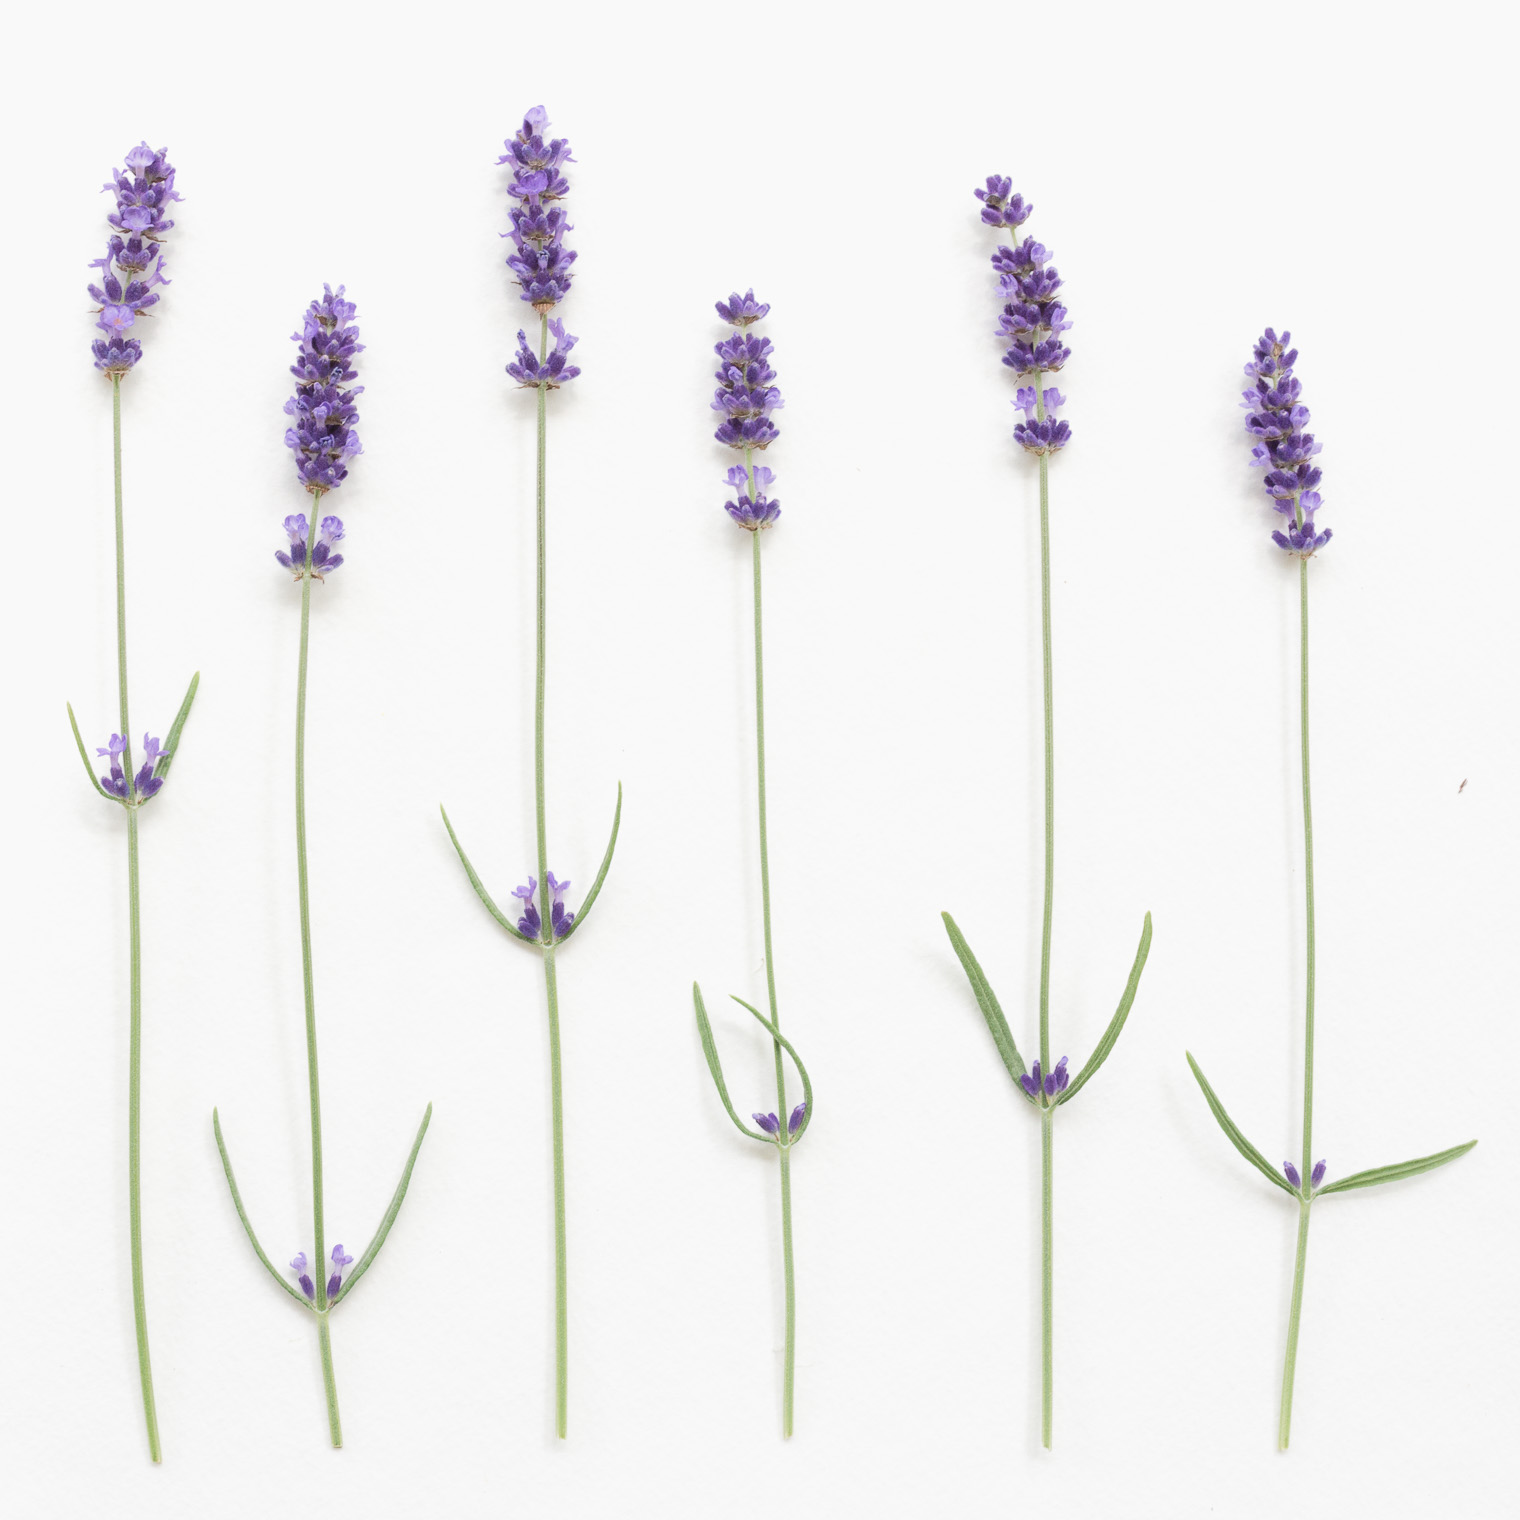 Purple Haze, Lavender Love, Keeping With the Times, Friday Finds